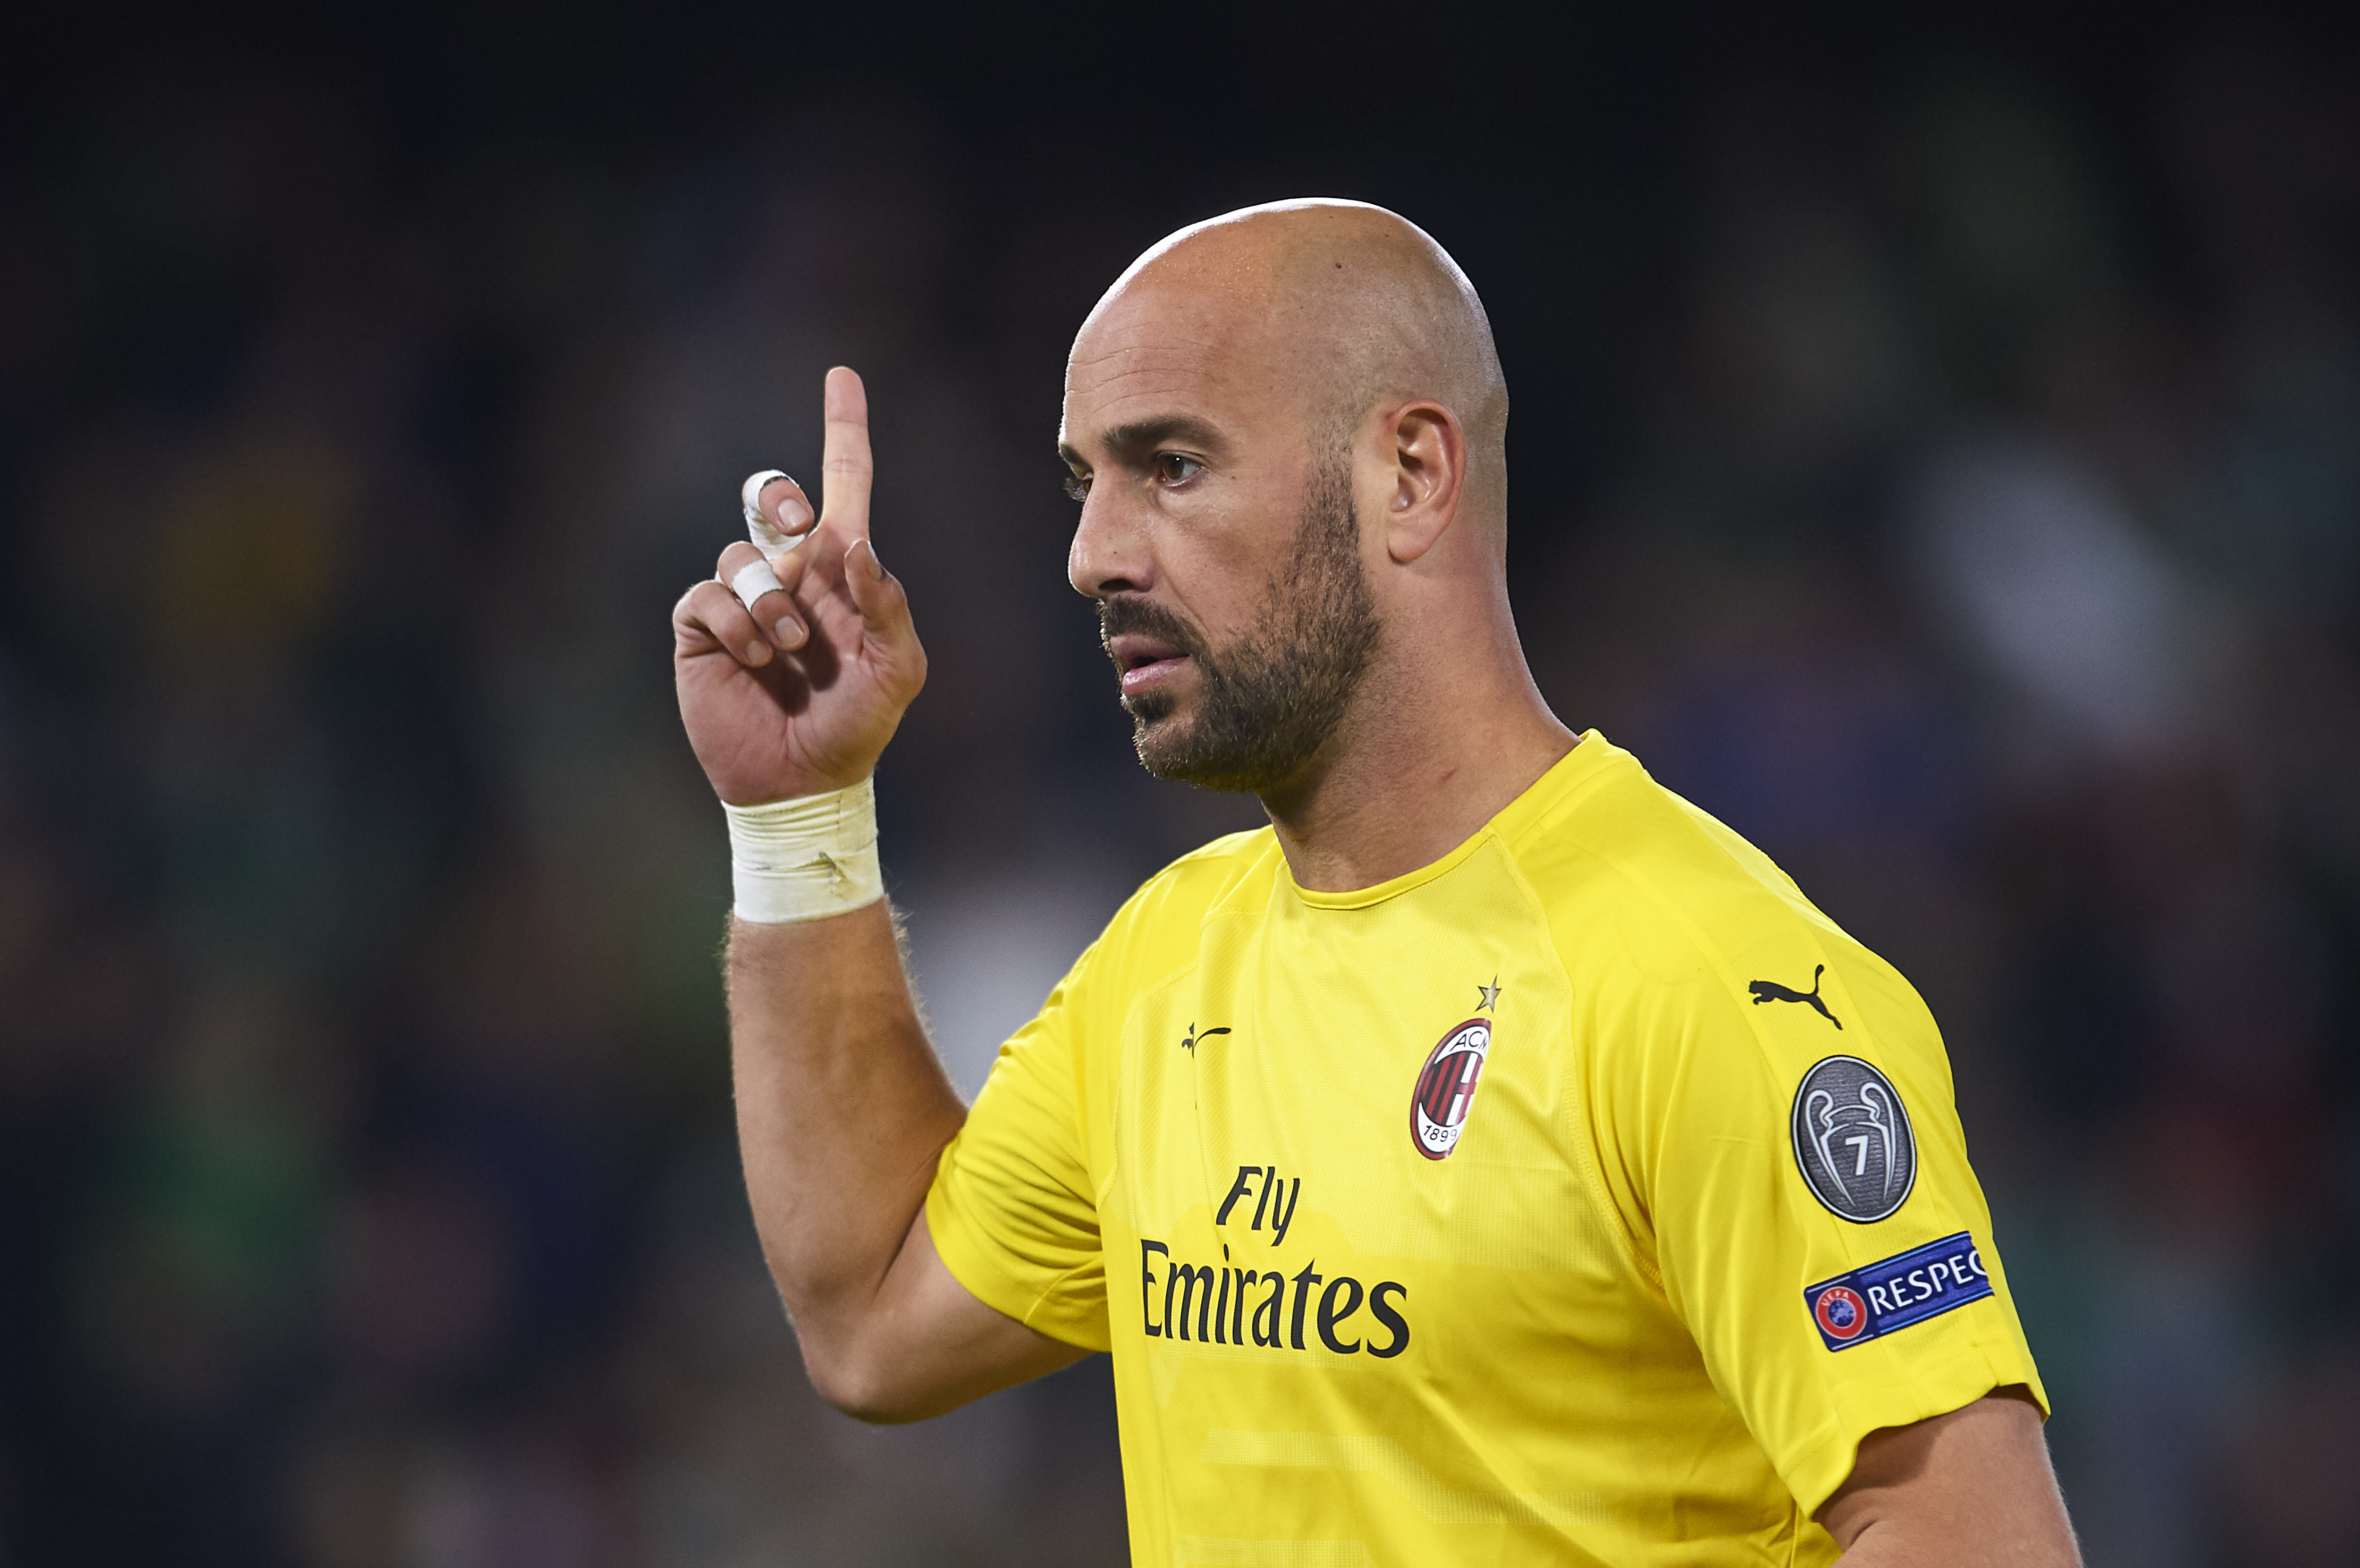 bent nevø ledsage Pepe Reina: "We must give soul, heart and grit for 90 minutes"